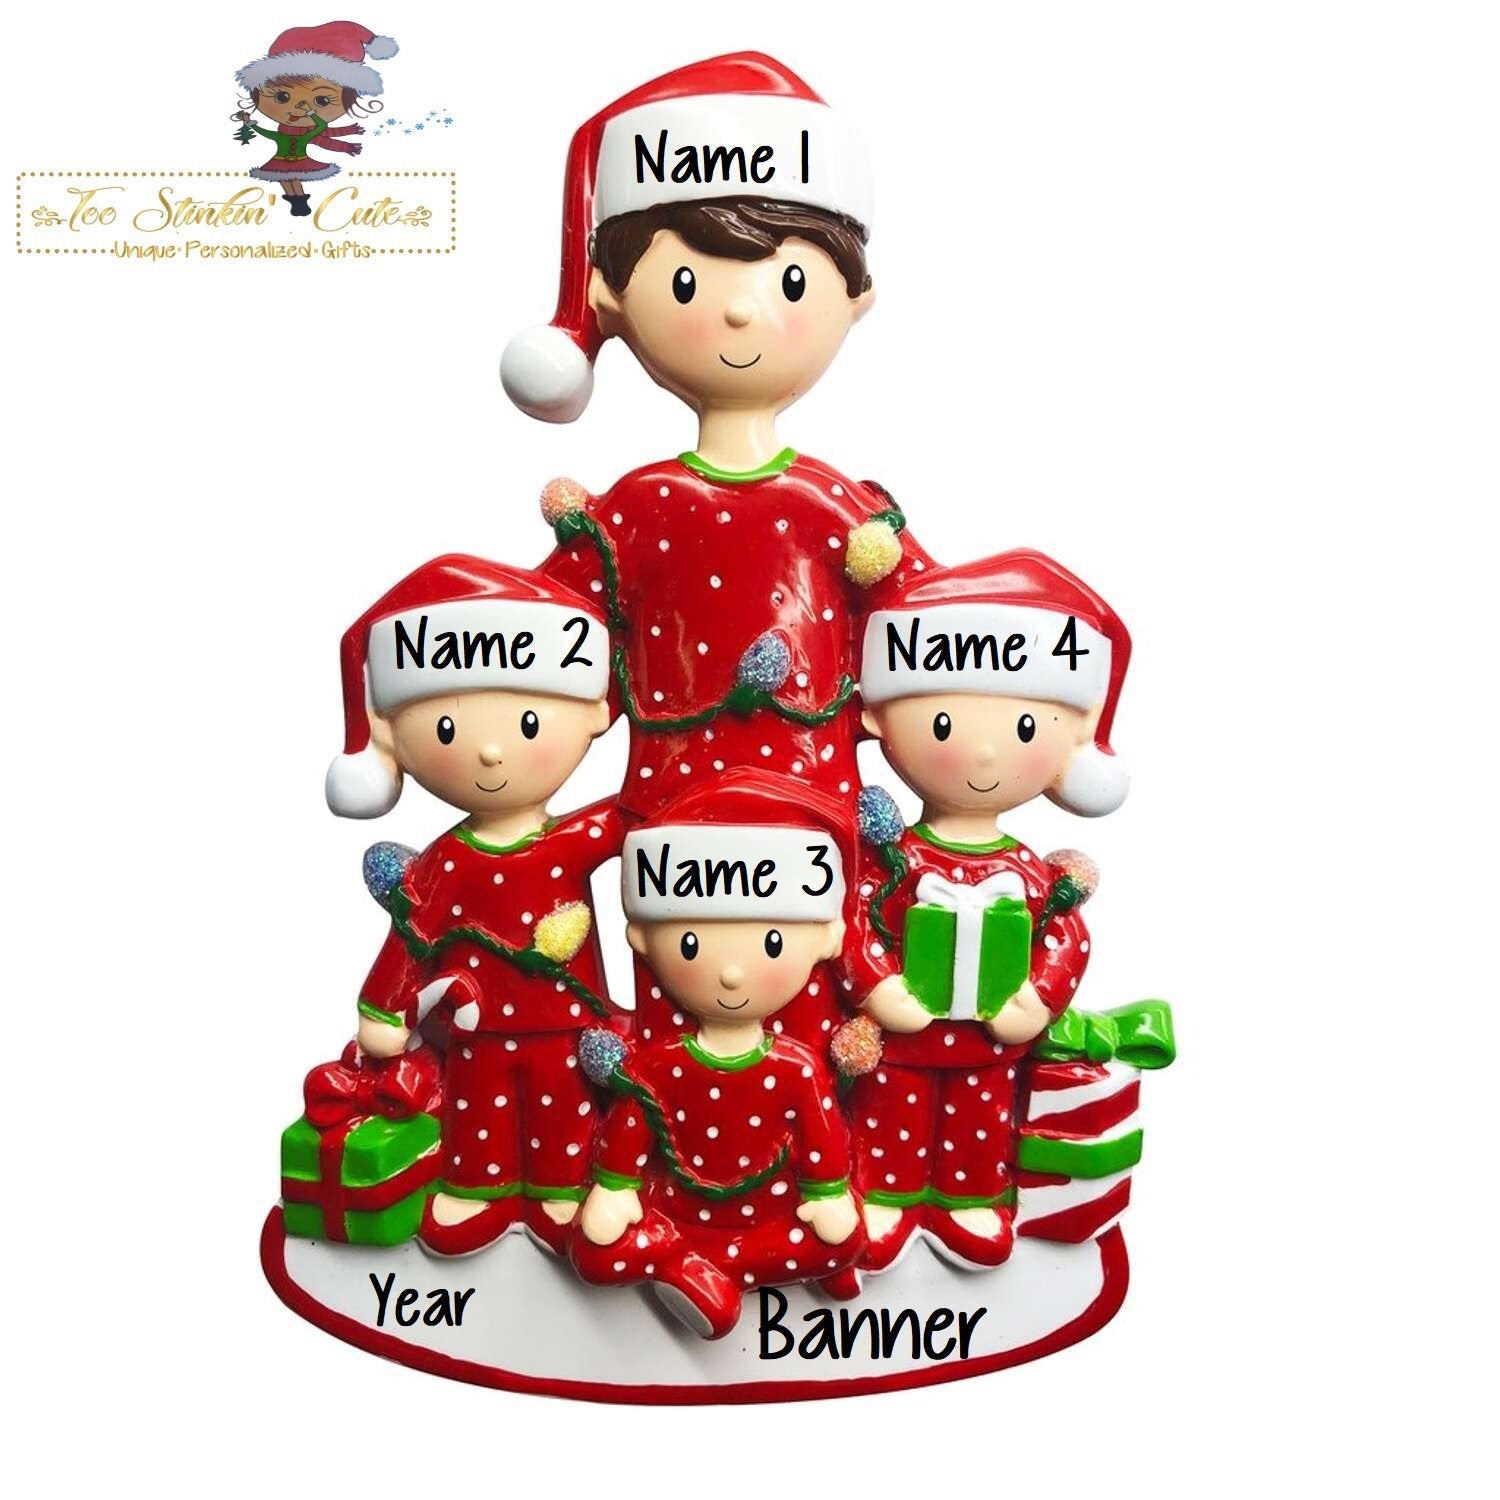 Christmas Ornament Single Dad with 3 Children/ Family of 4/ Brothers/ Grandfather/ Uncle/ Godfather - Personalized + Free Shipping!